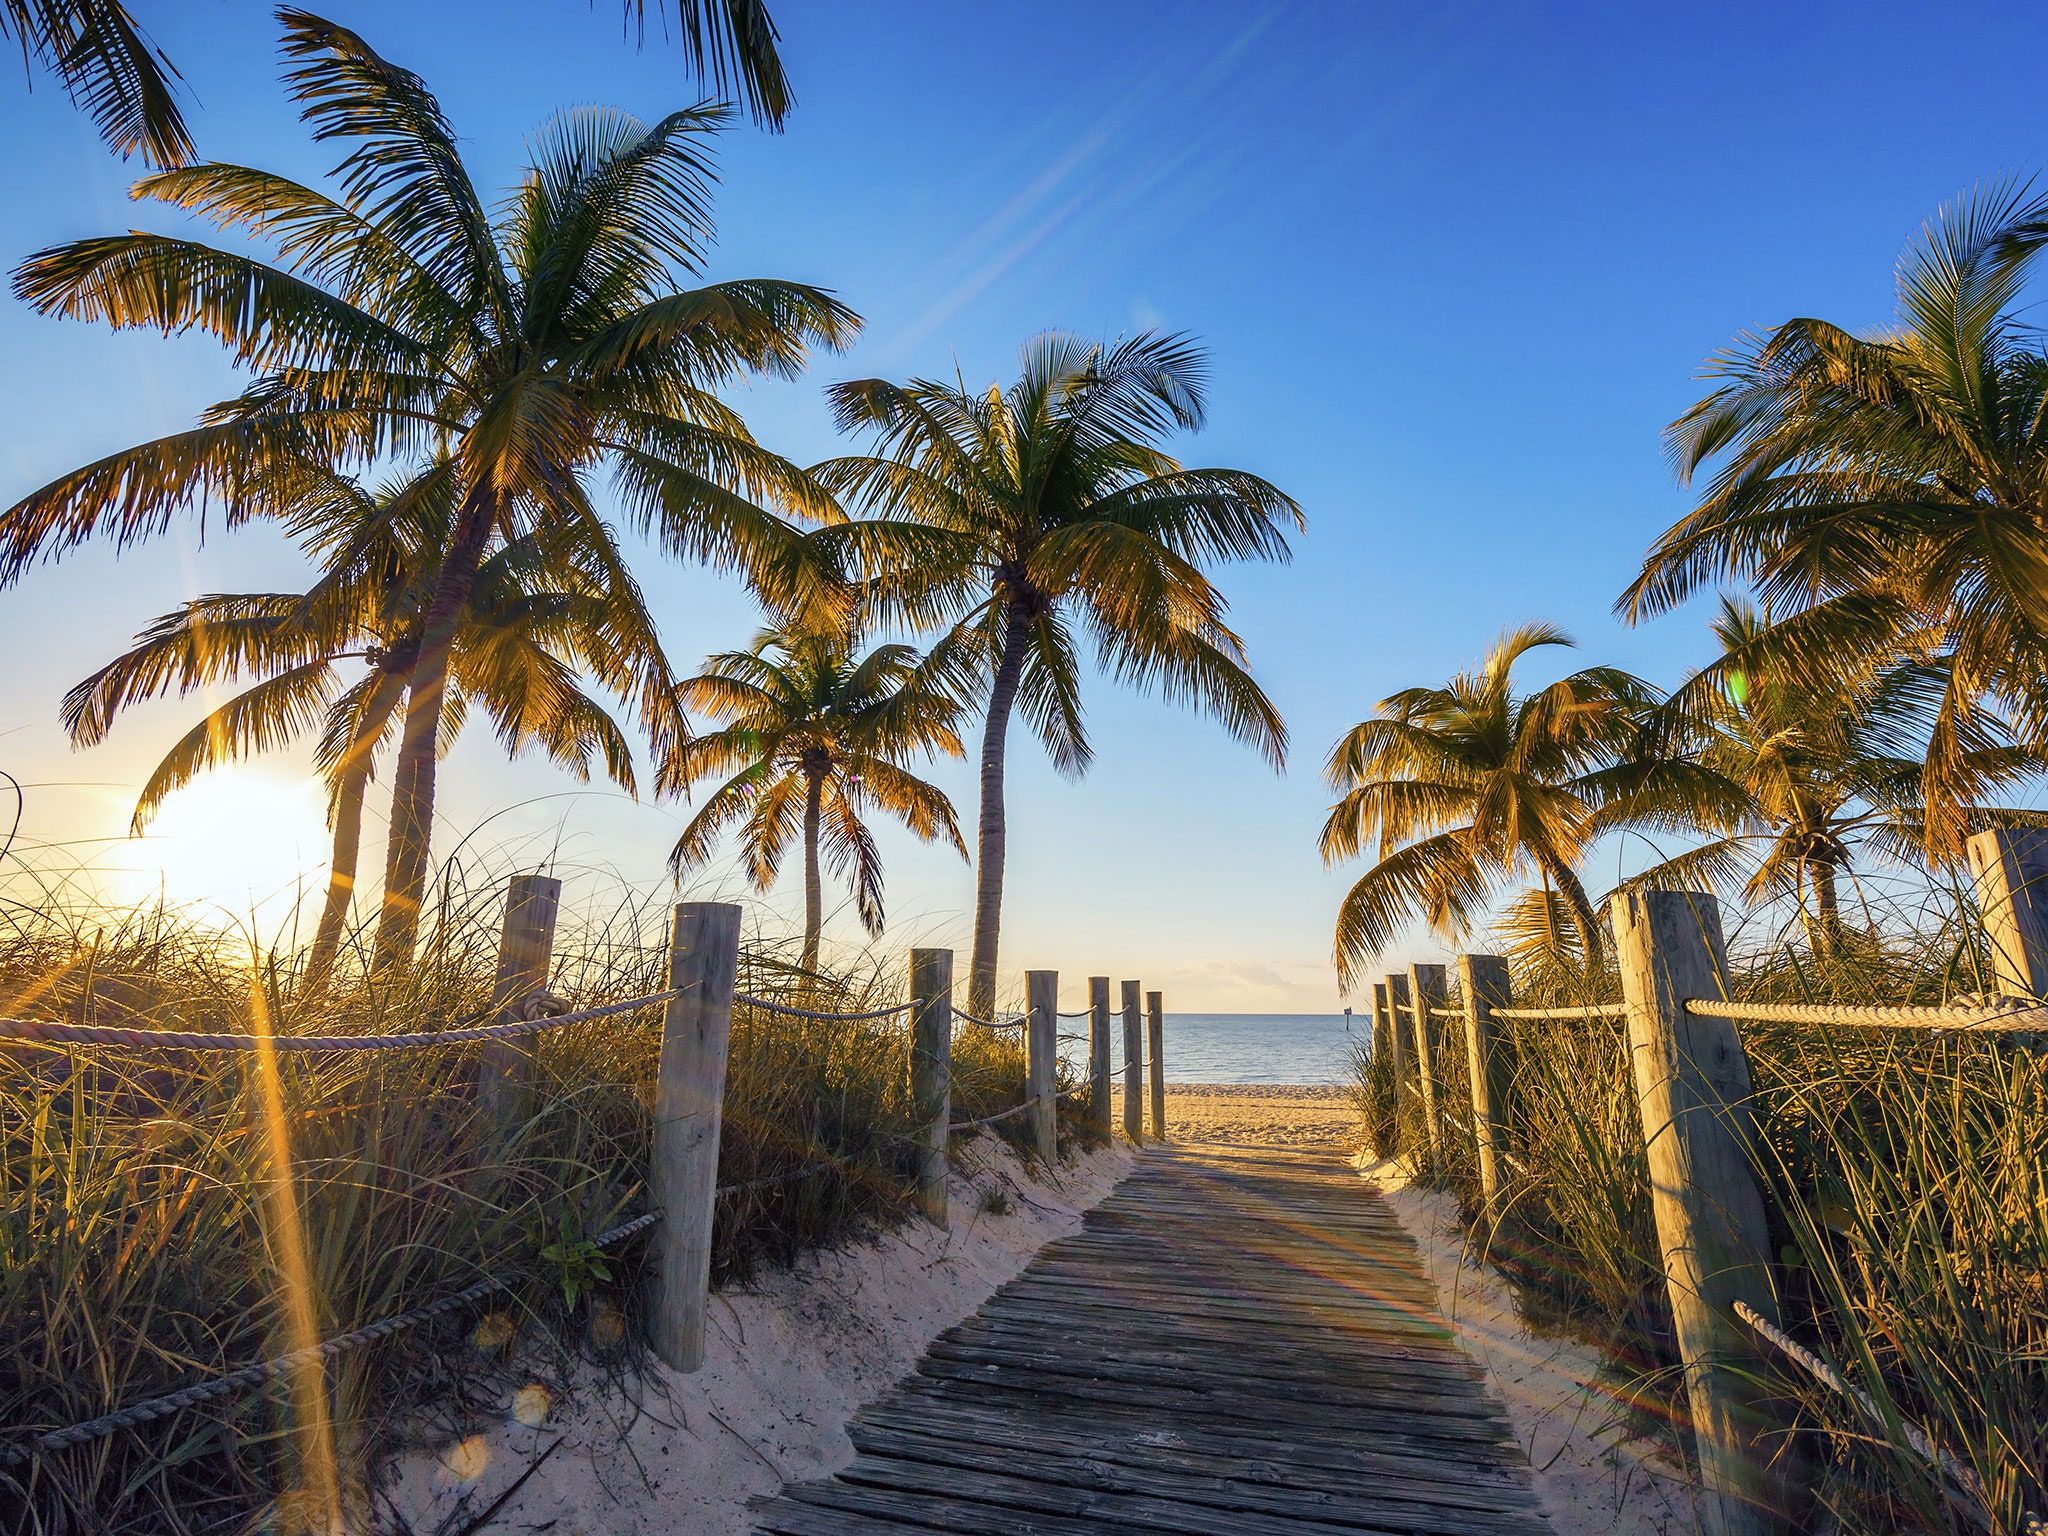 A wooden walkway leads to the beach - Florida